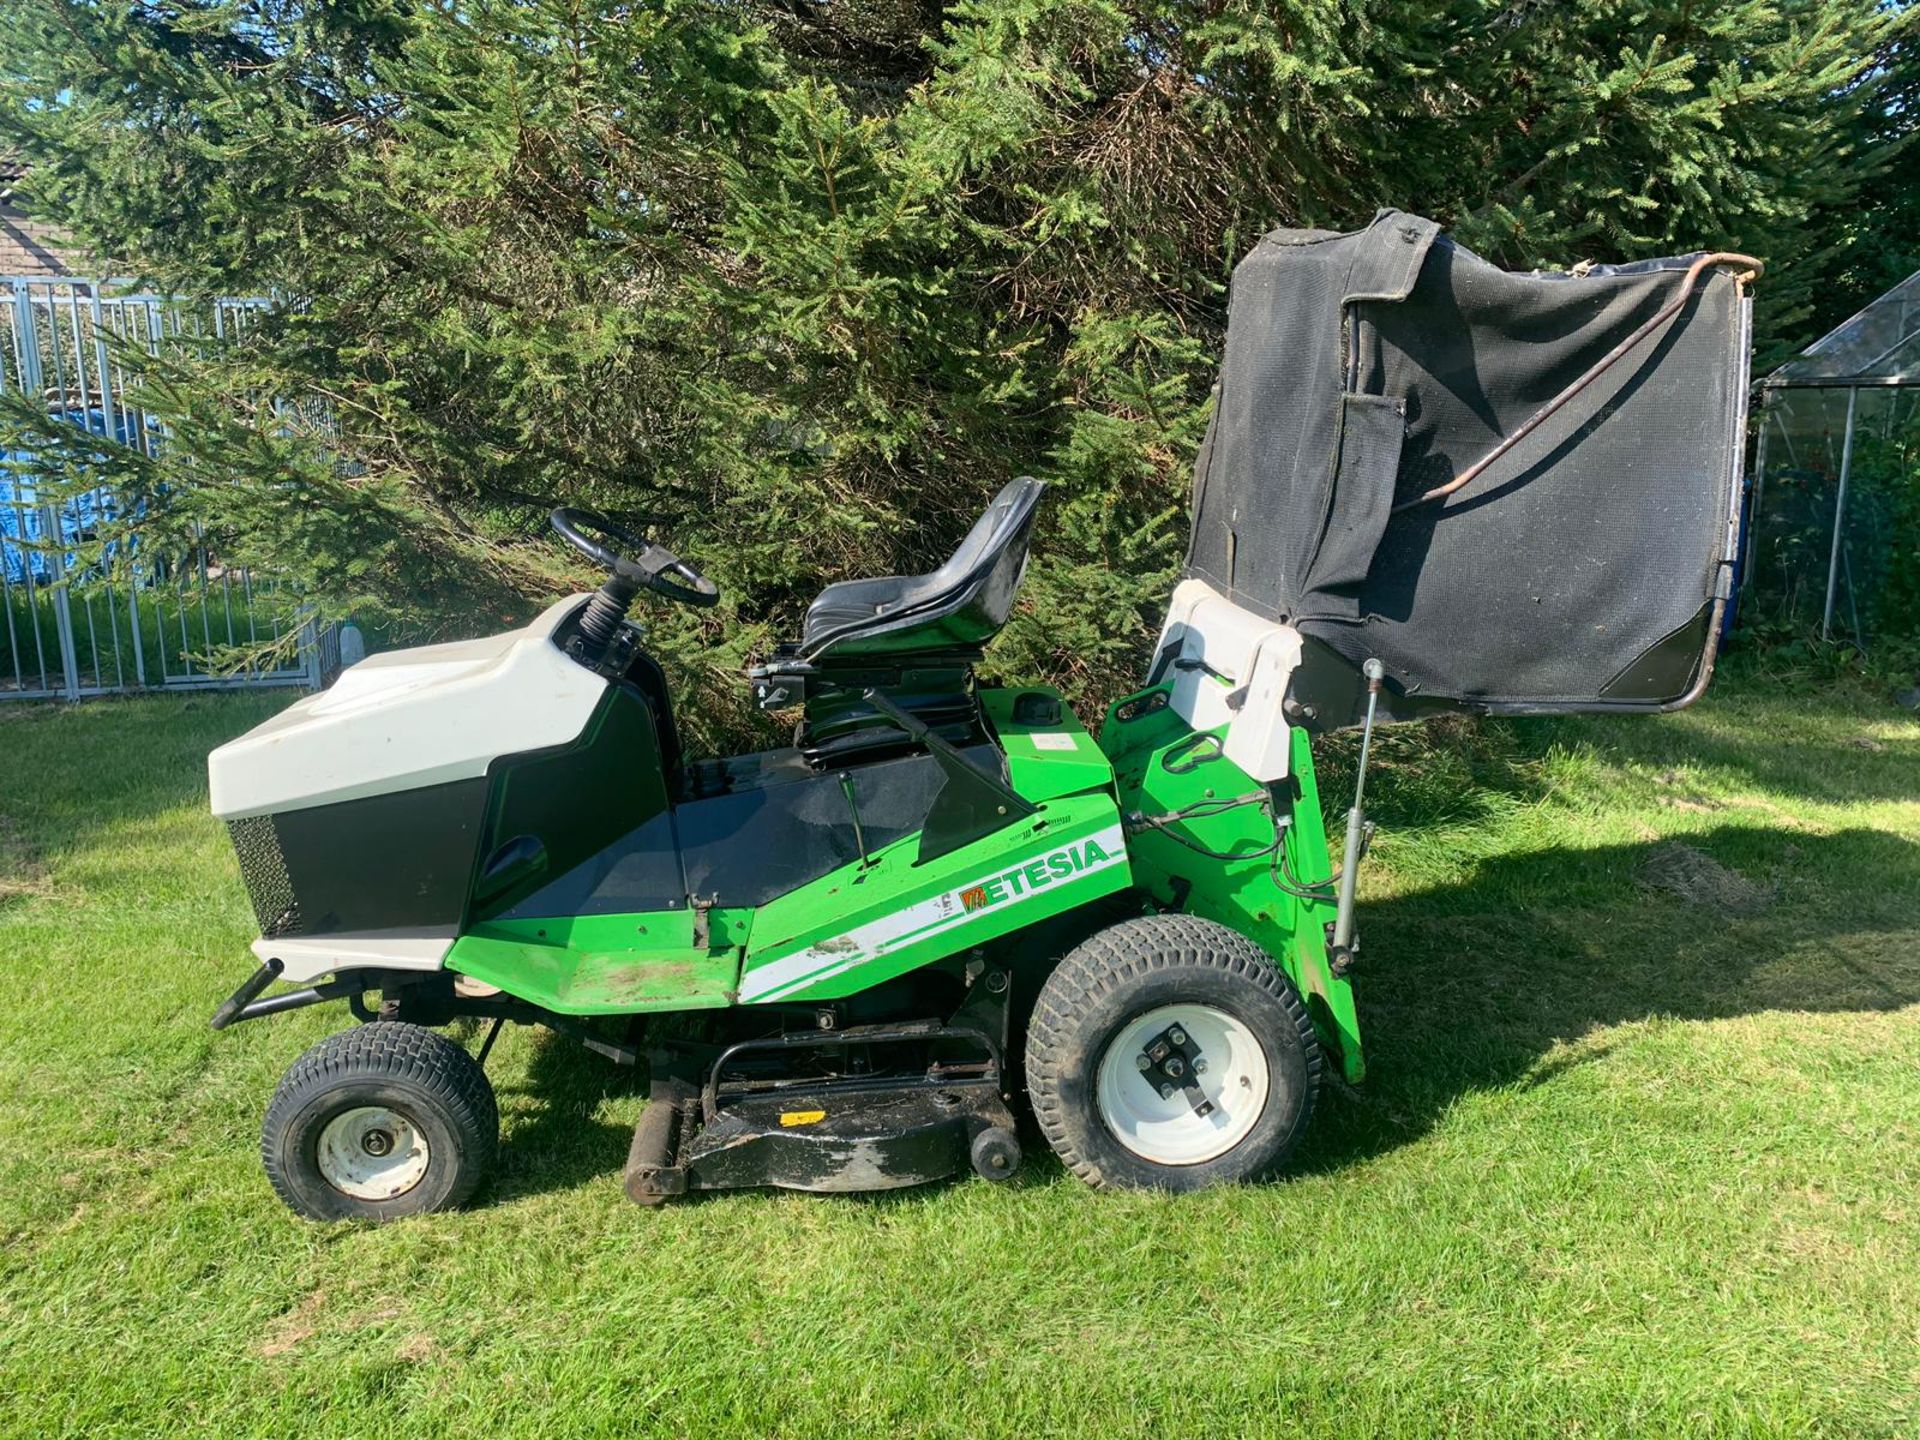 ETESIA MVEHH HYDRO RIDE ON LAWN MOWER C/W REAR GRASS COLLECTOR, RUNS, WORKS AND CUTS *PLUS VAT* - Image 7 of 16